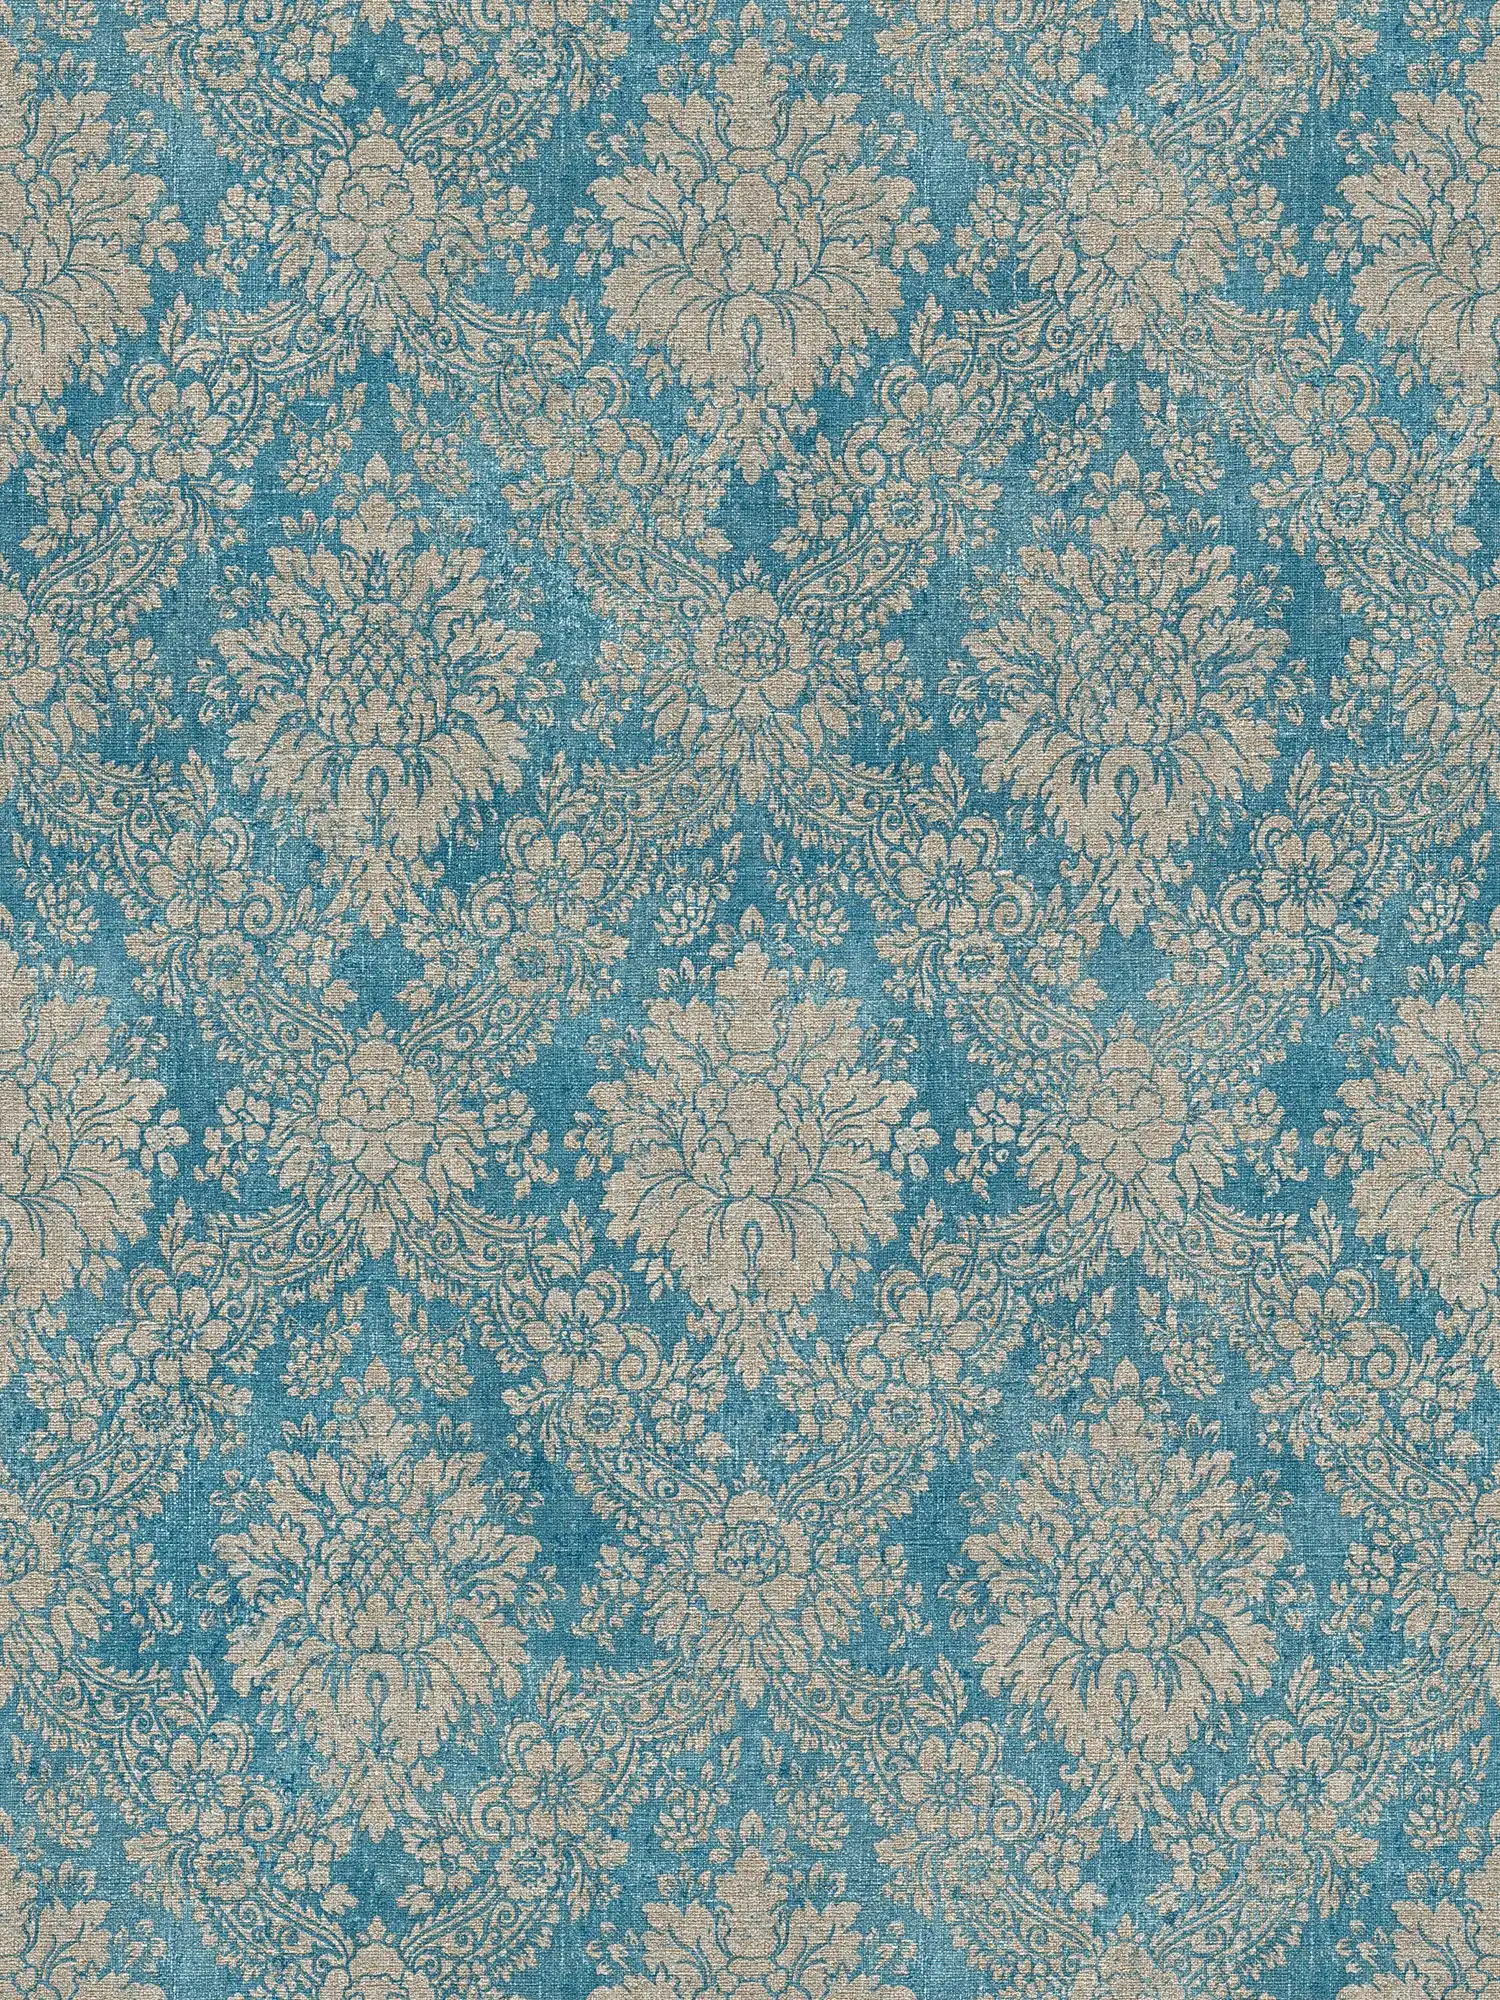         Floral ornament wallpaper with metallic effect & used look - blue, brown, metallic
    